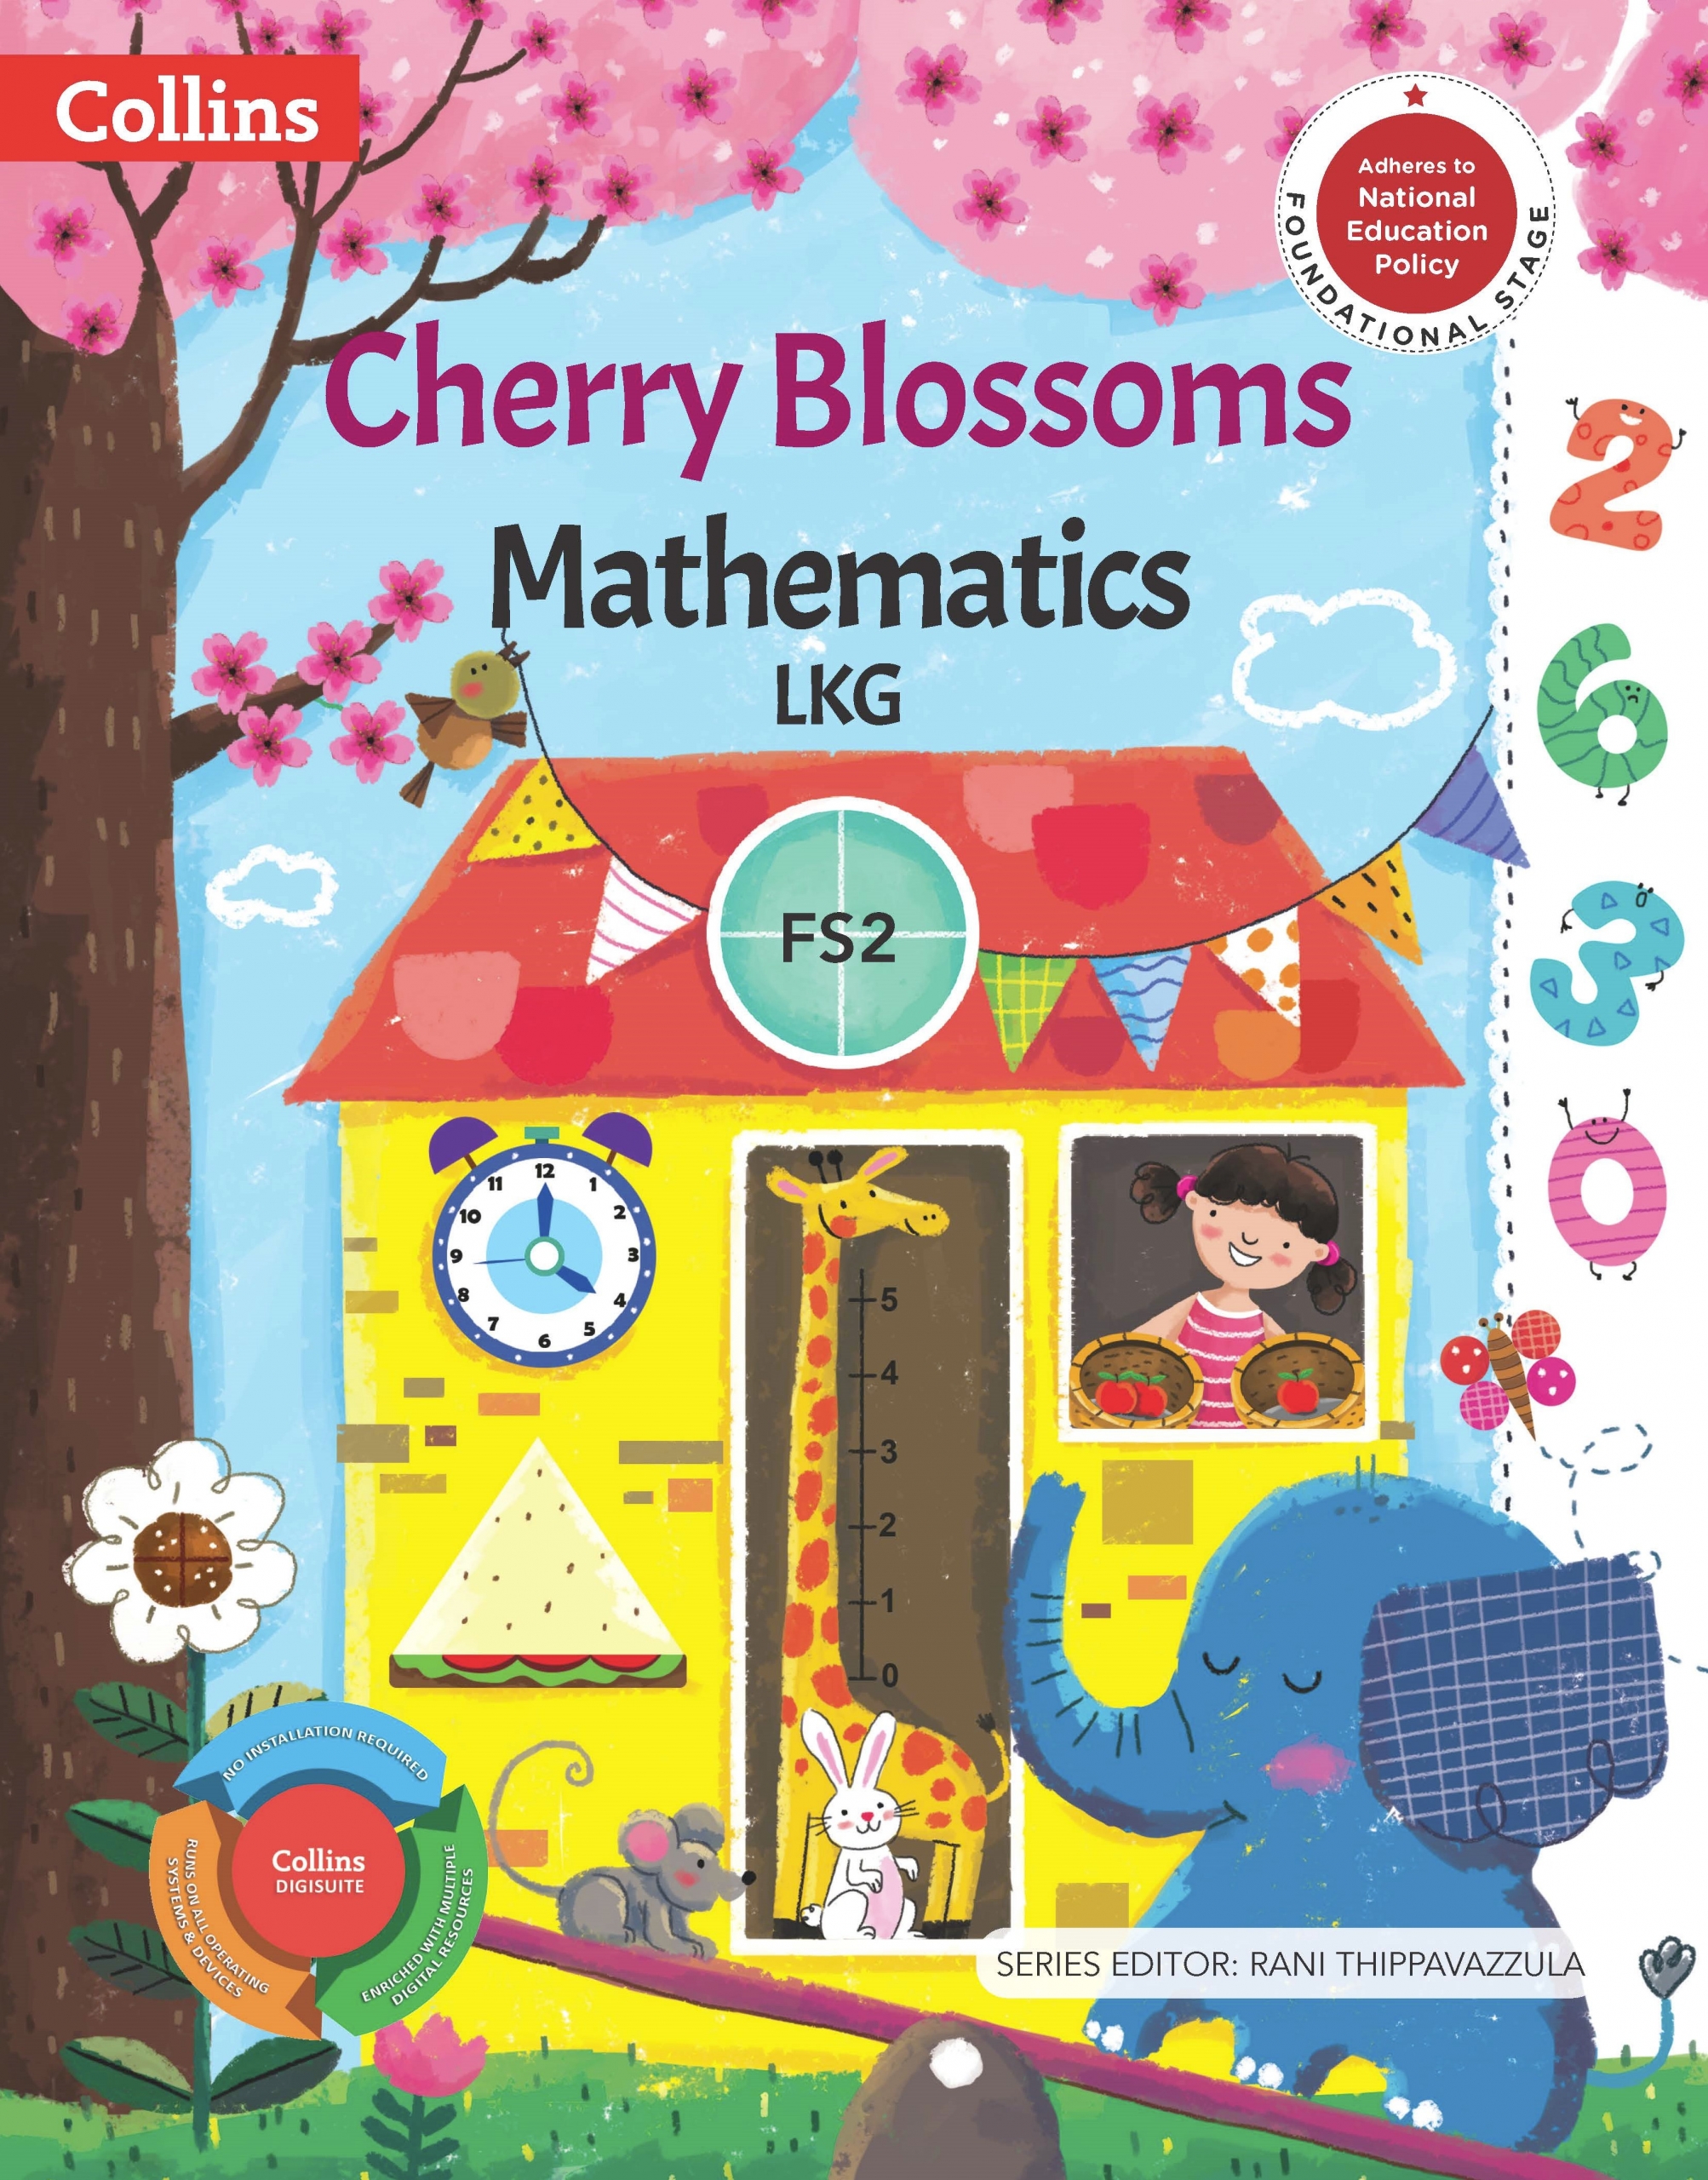 Cherry Blossoms LKG Maths scaled